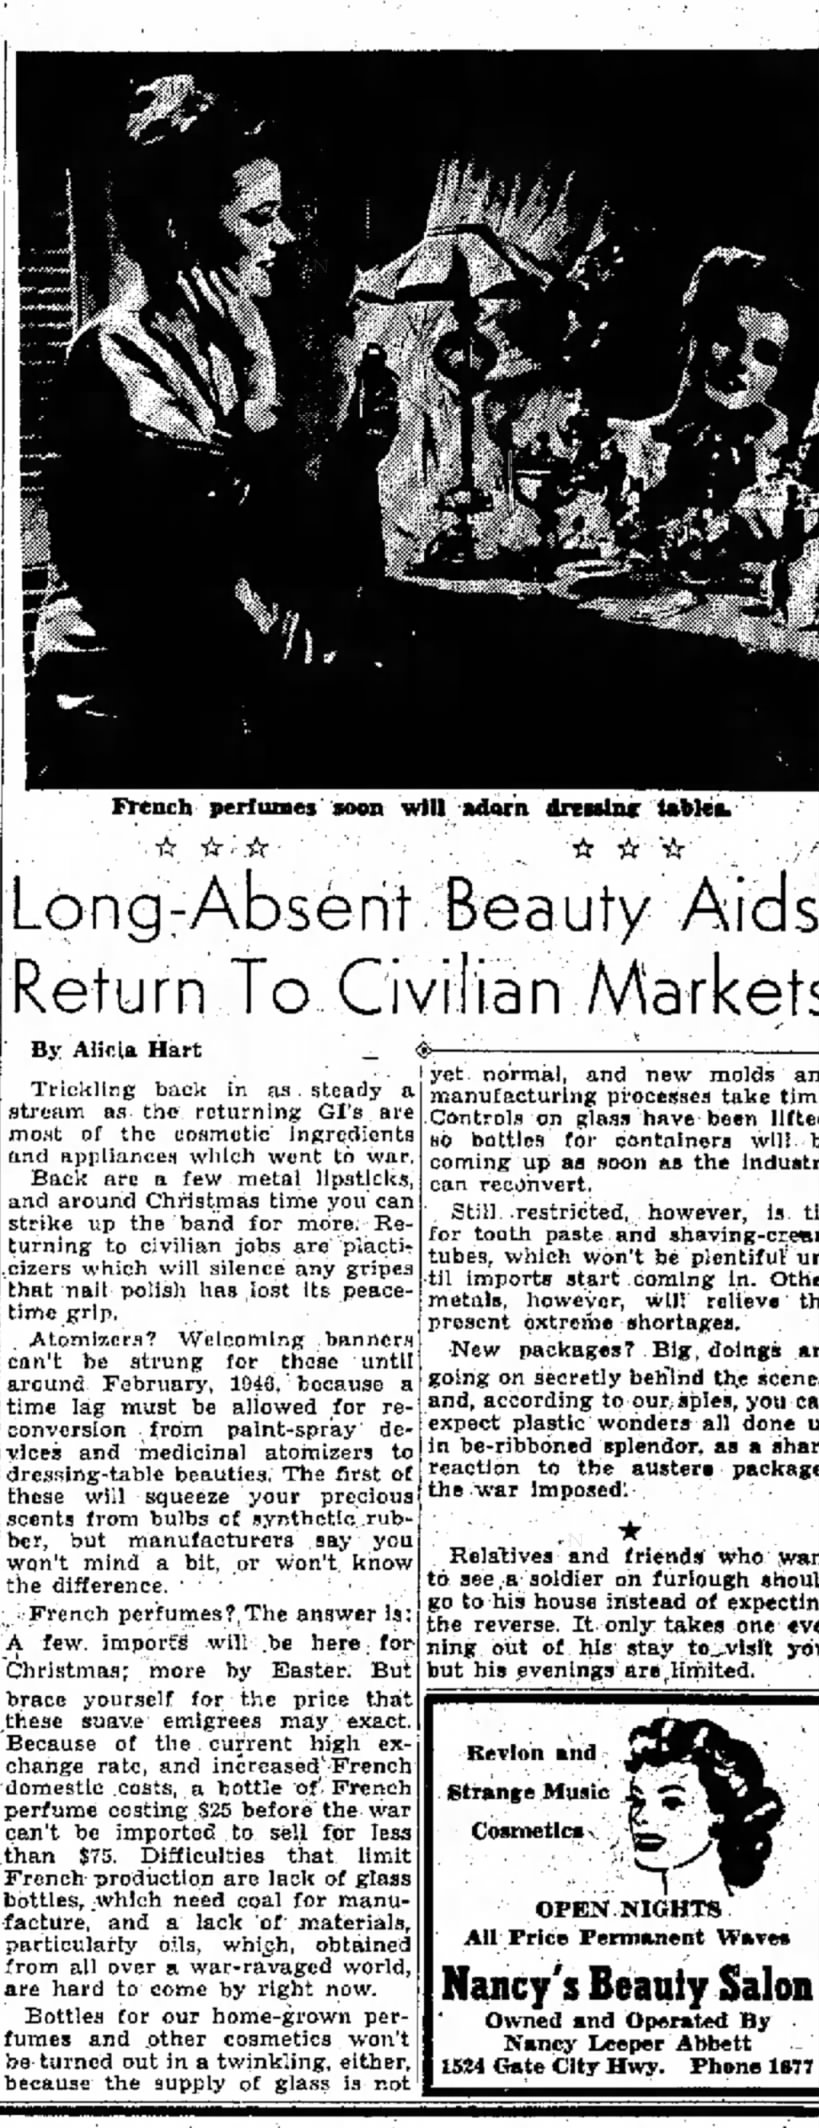 October 14 1945 article about after war products being available again